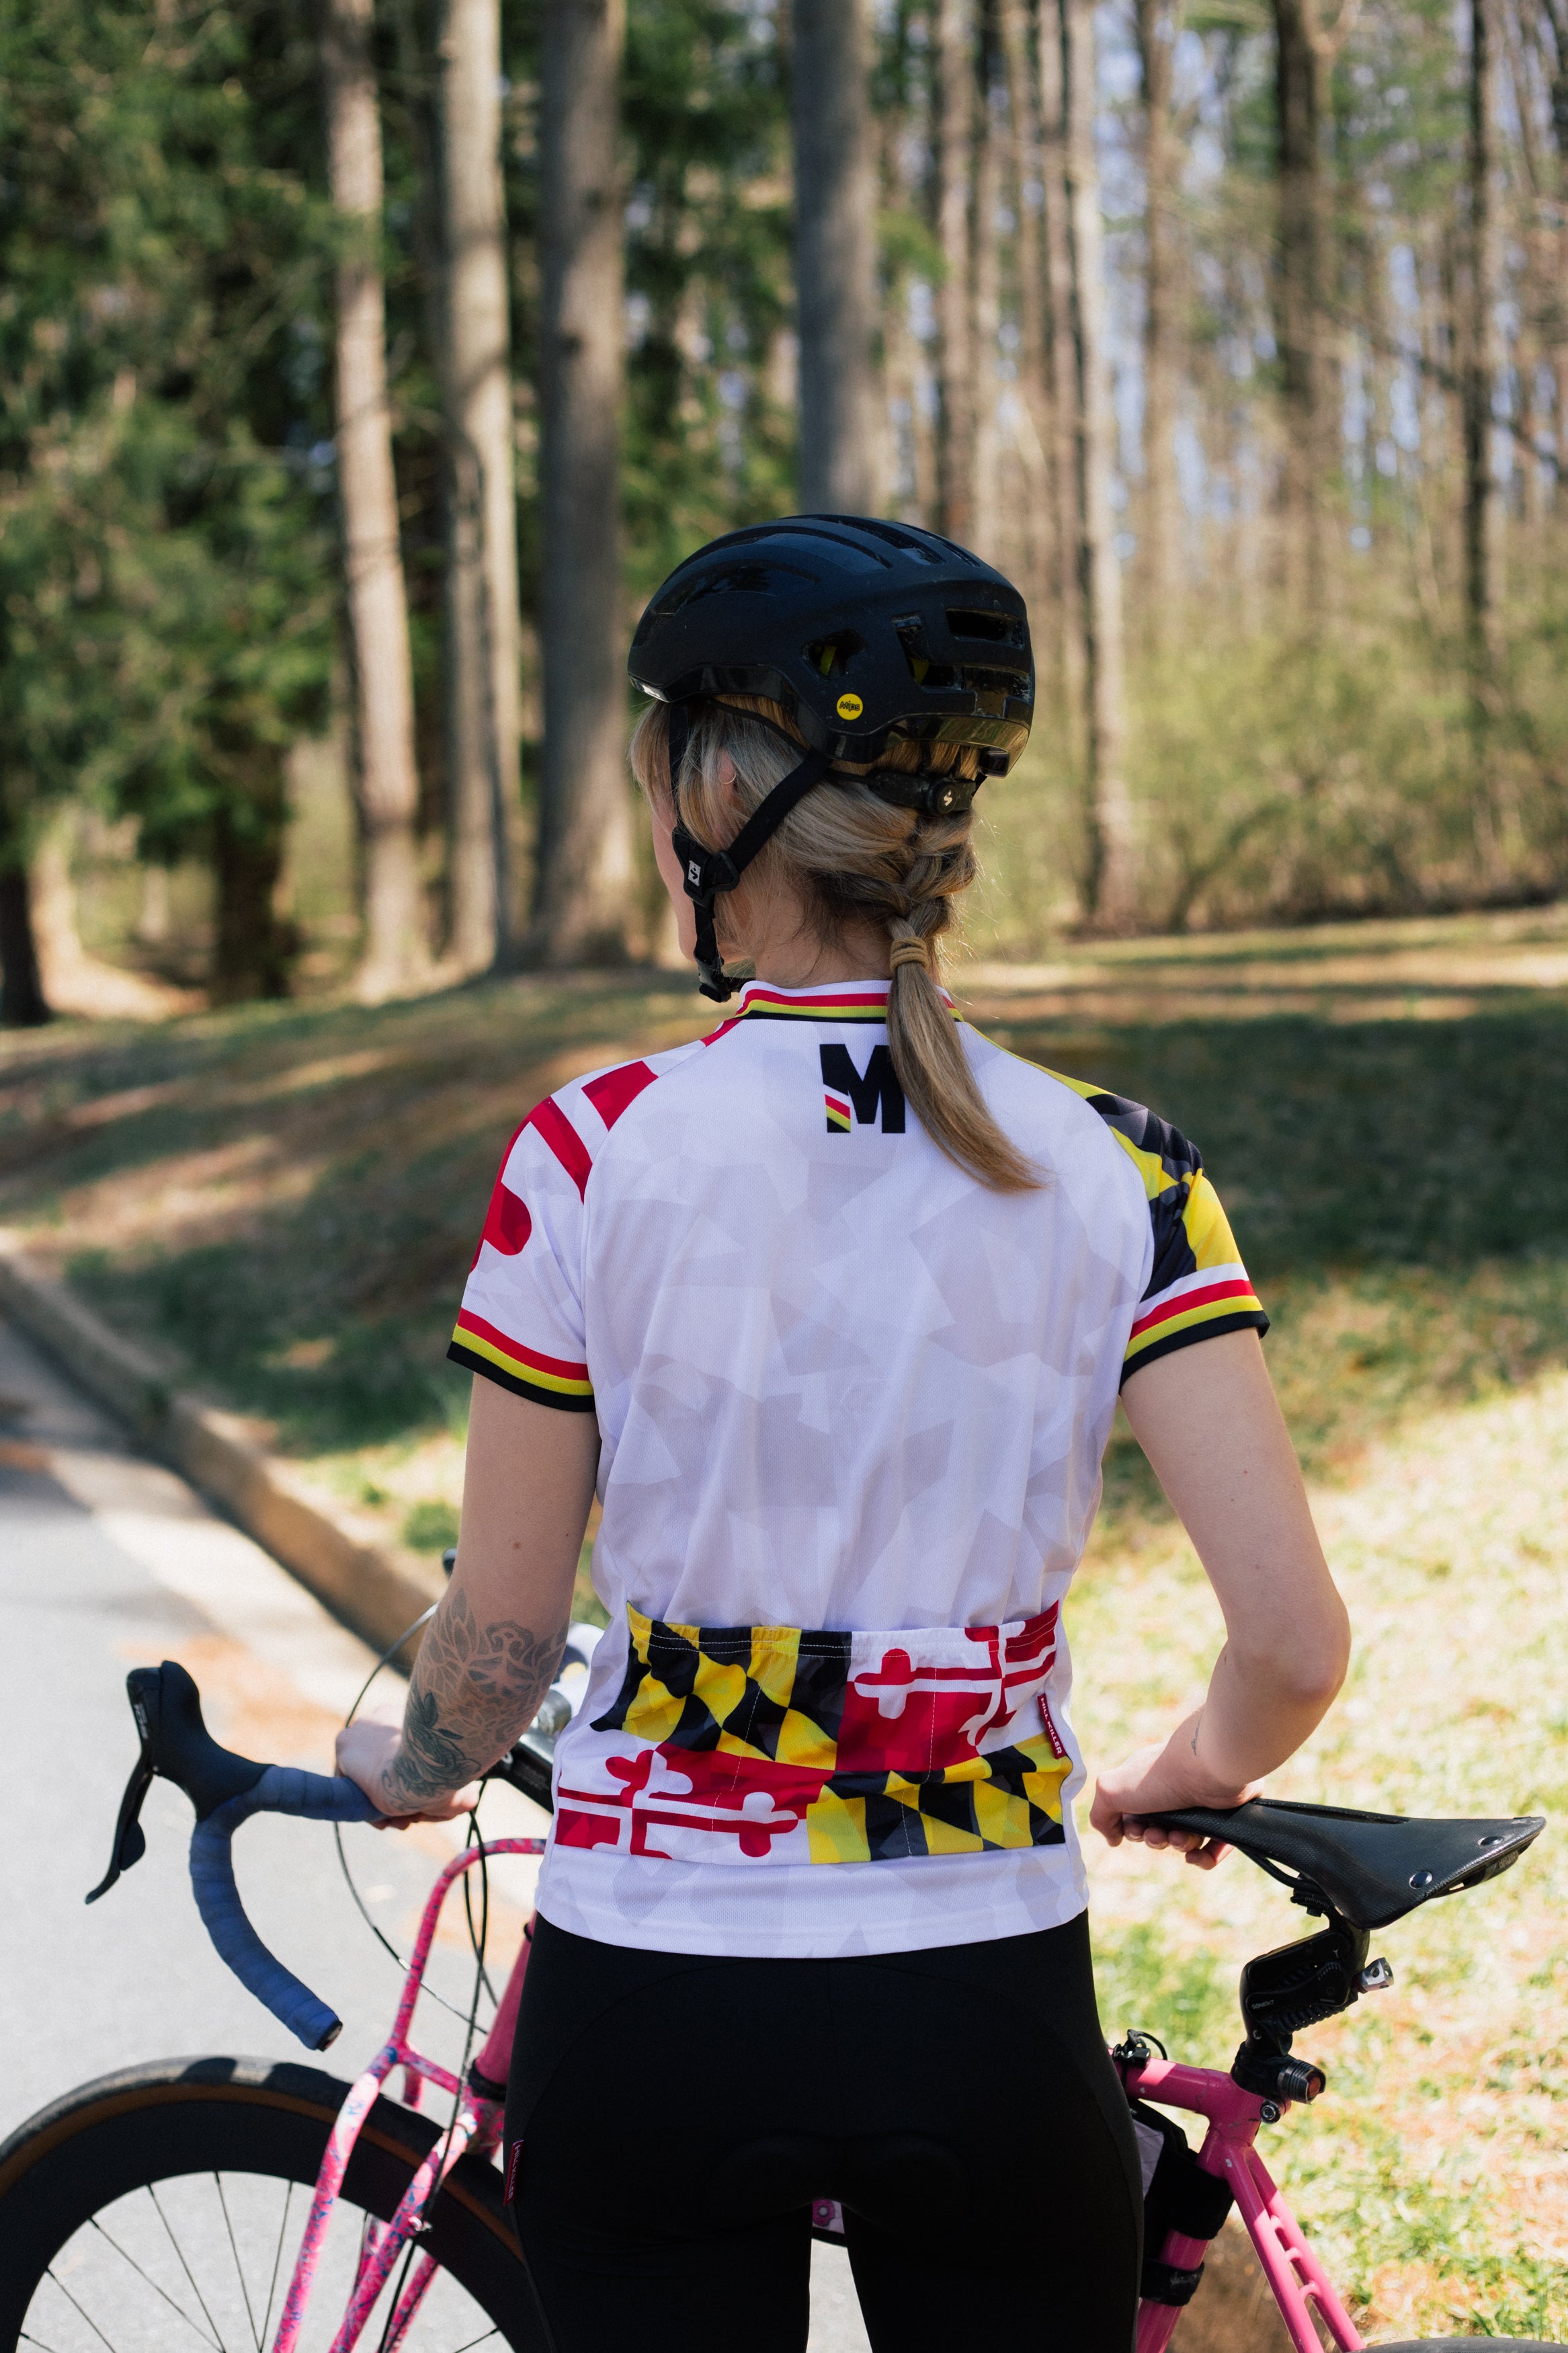 Maryland Recon White Jersey FINAL SALE SM & 2X ONLY